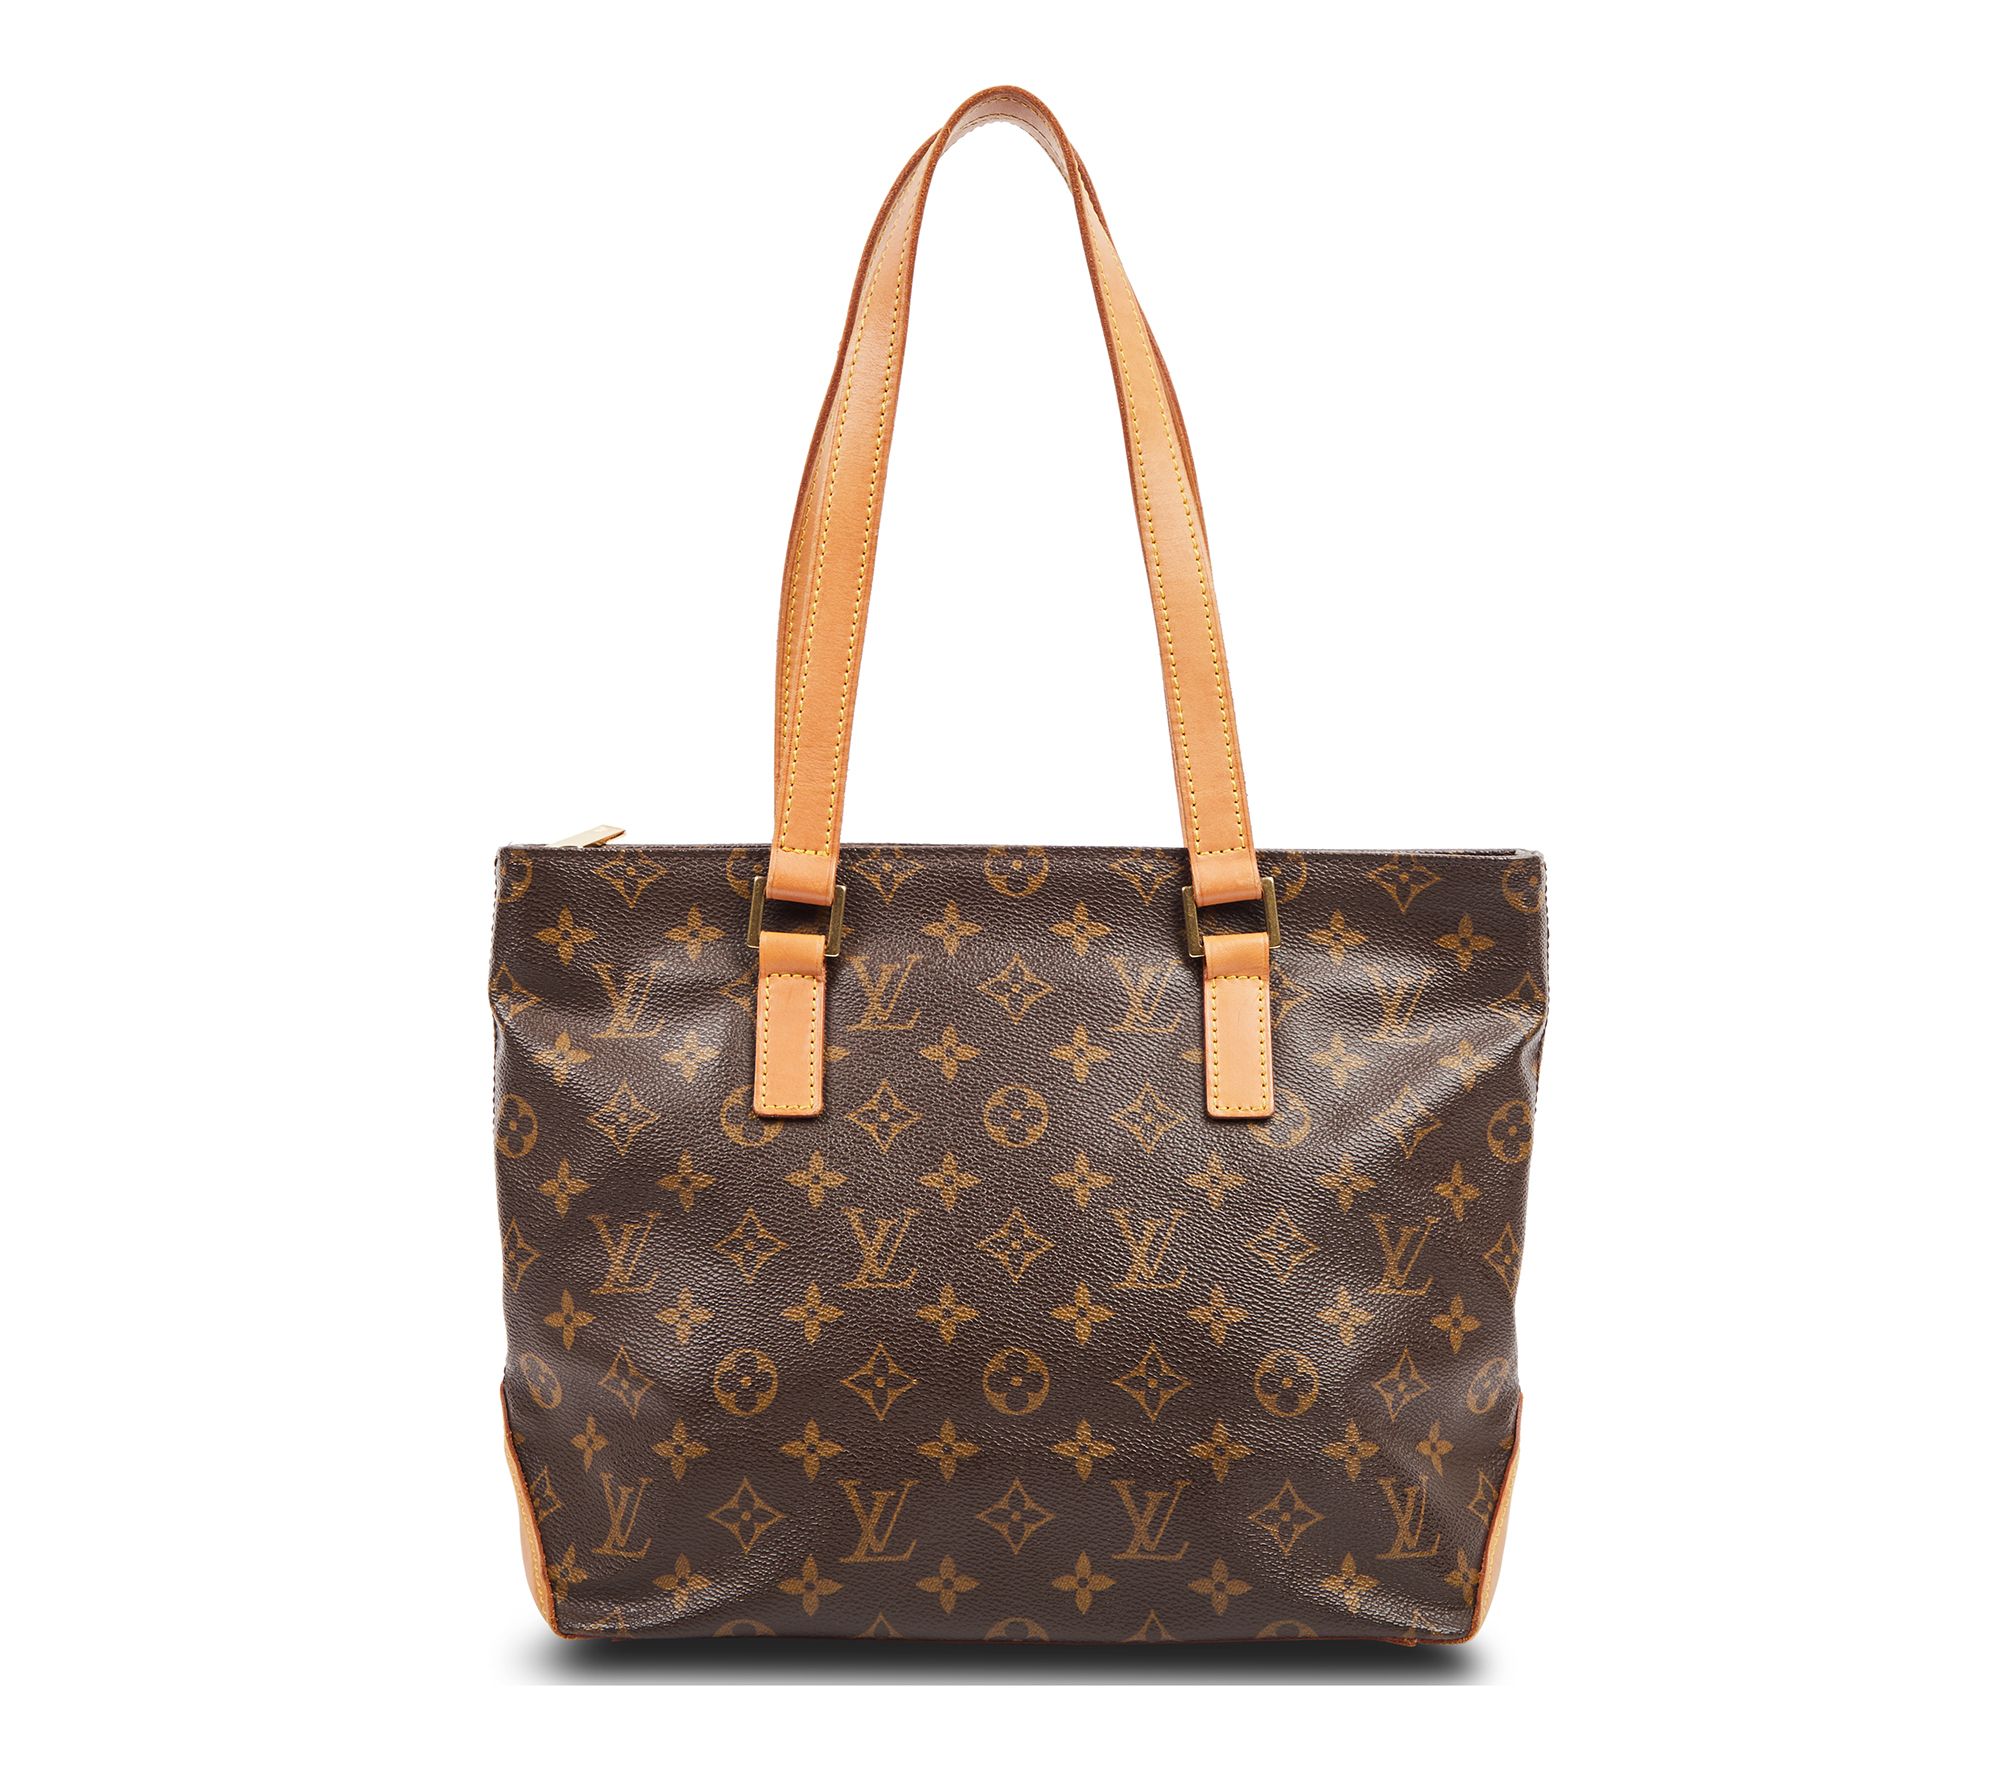 QVC Hunniez lol But truly obsessed with the LV speedy at the